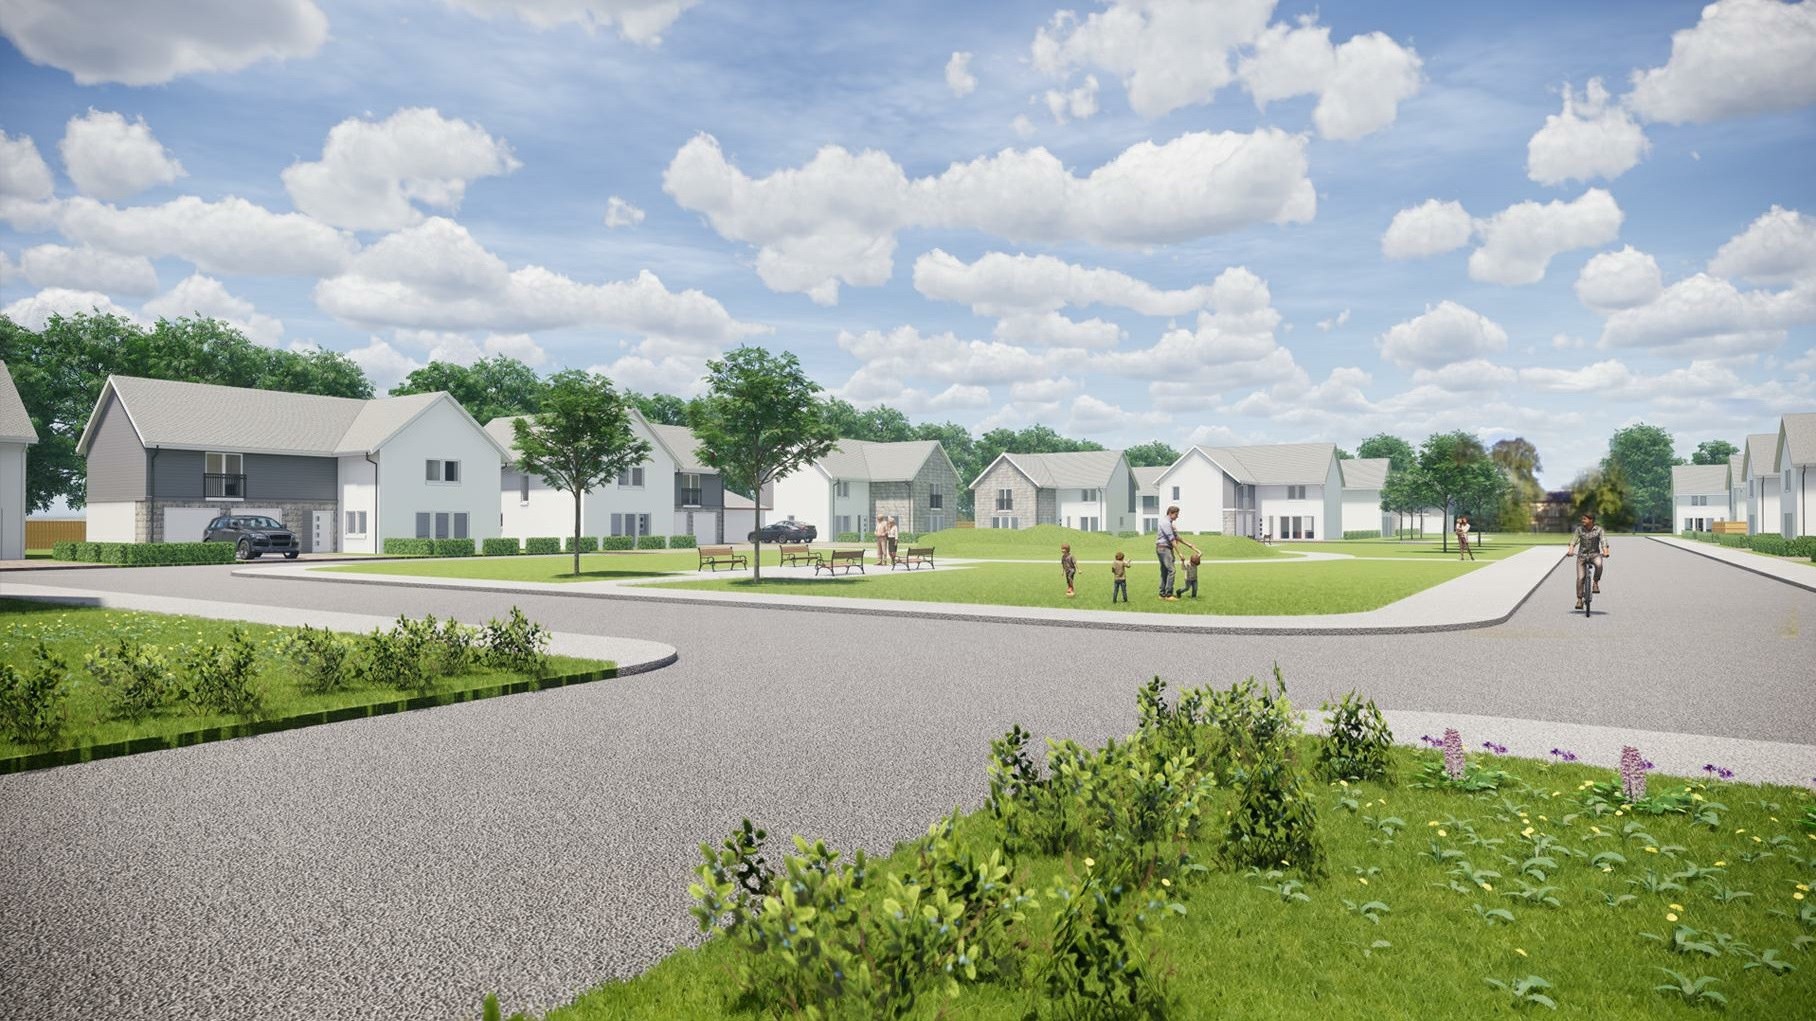 Bancon Homes moves south with plans for 37 new homes South Lanarkshire